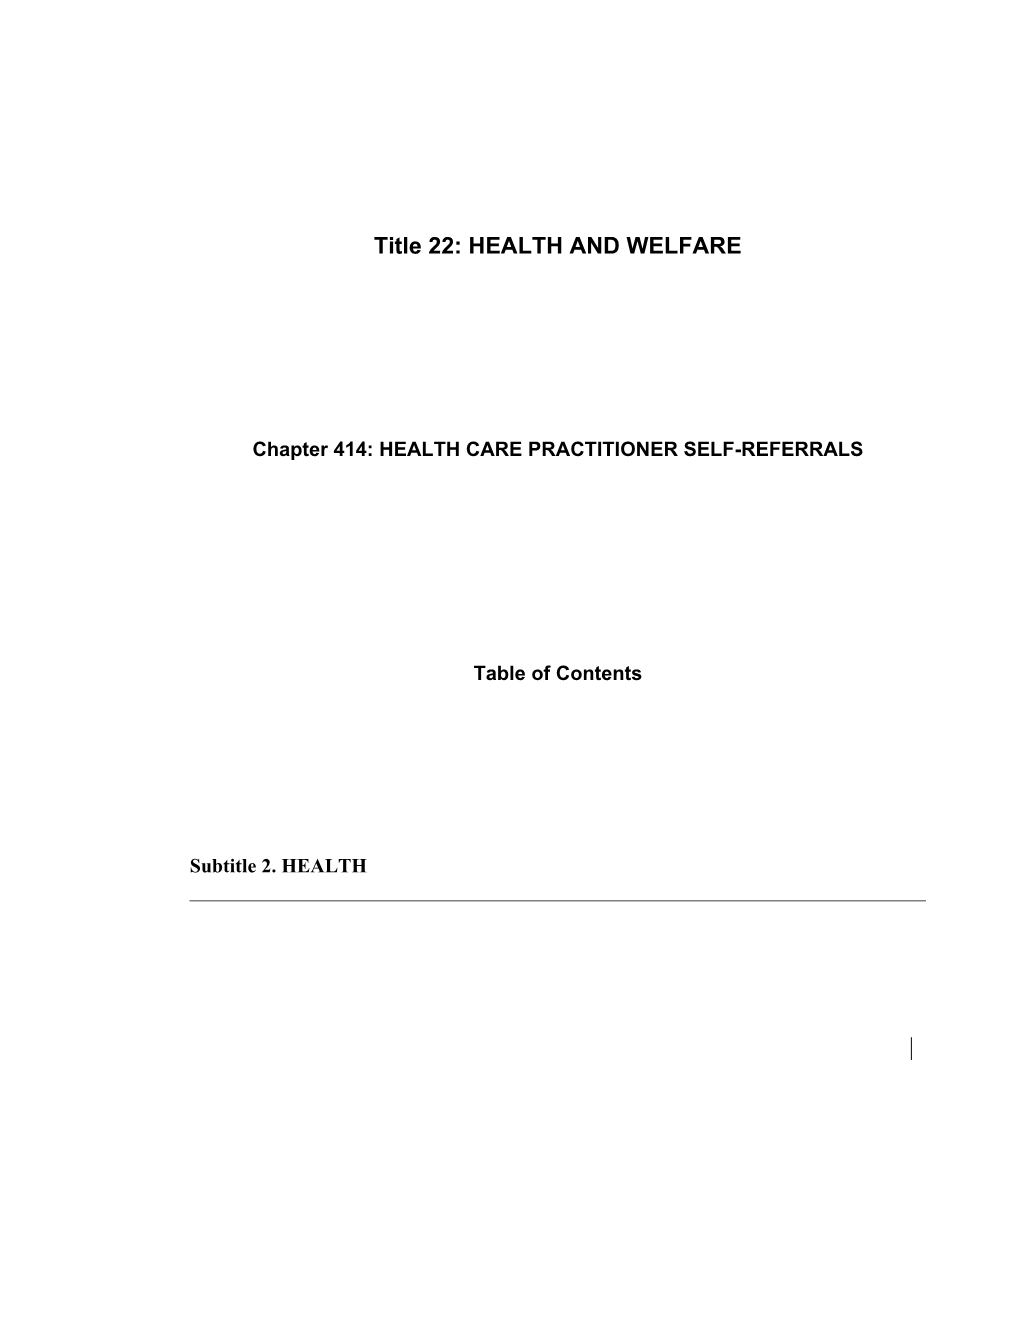 MRS Title 22, Chapter414: HEALTH CARE PRACTITIONER SELF-REFERRALS